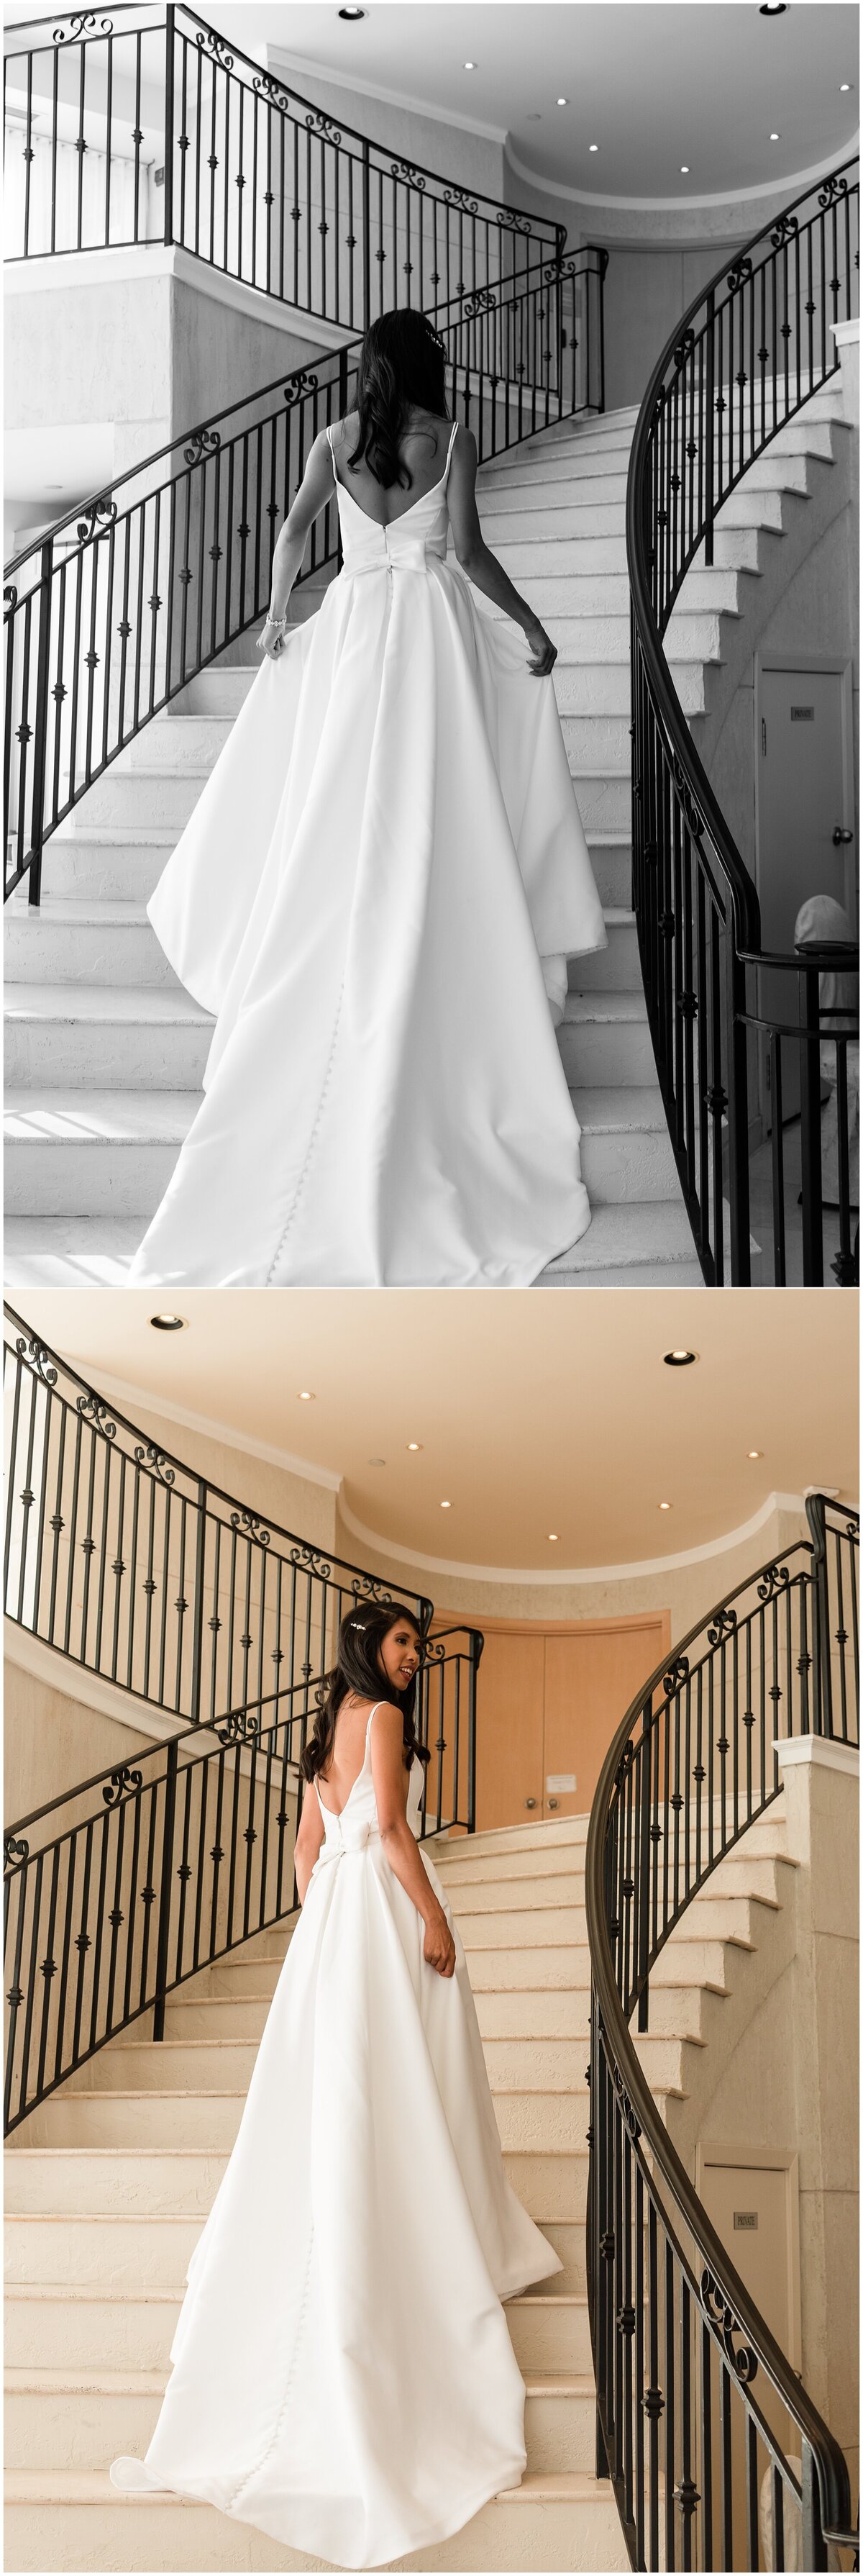 Photographs of the bride during her wedding going up the elegant staircase showing off the length and the back of her dress